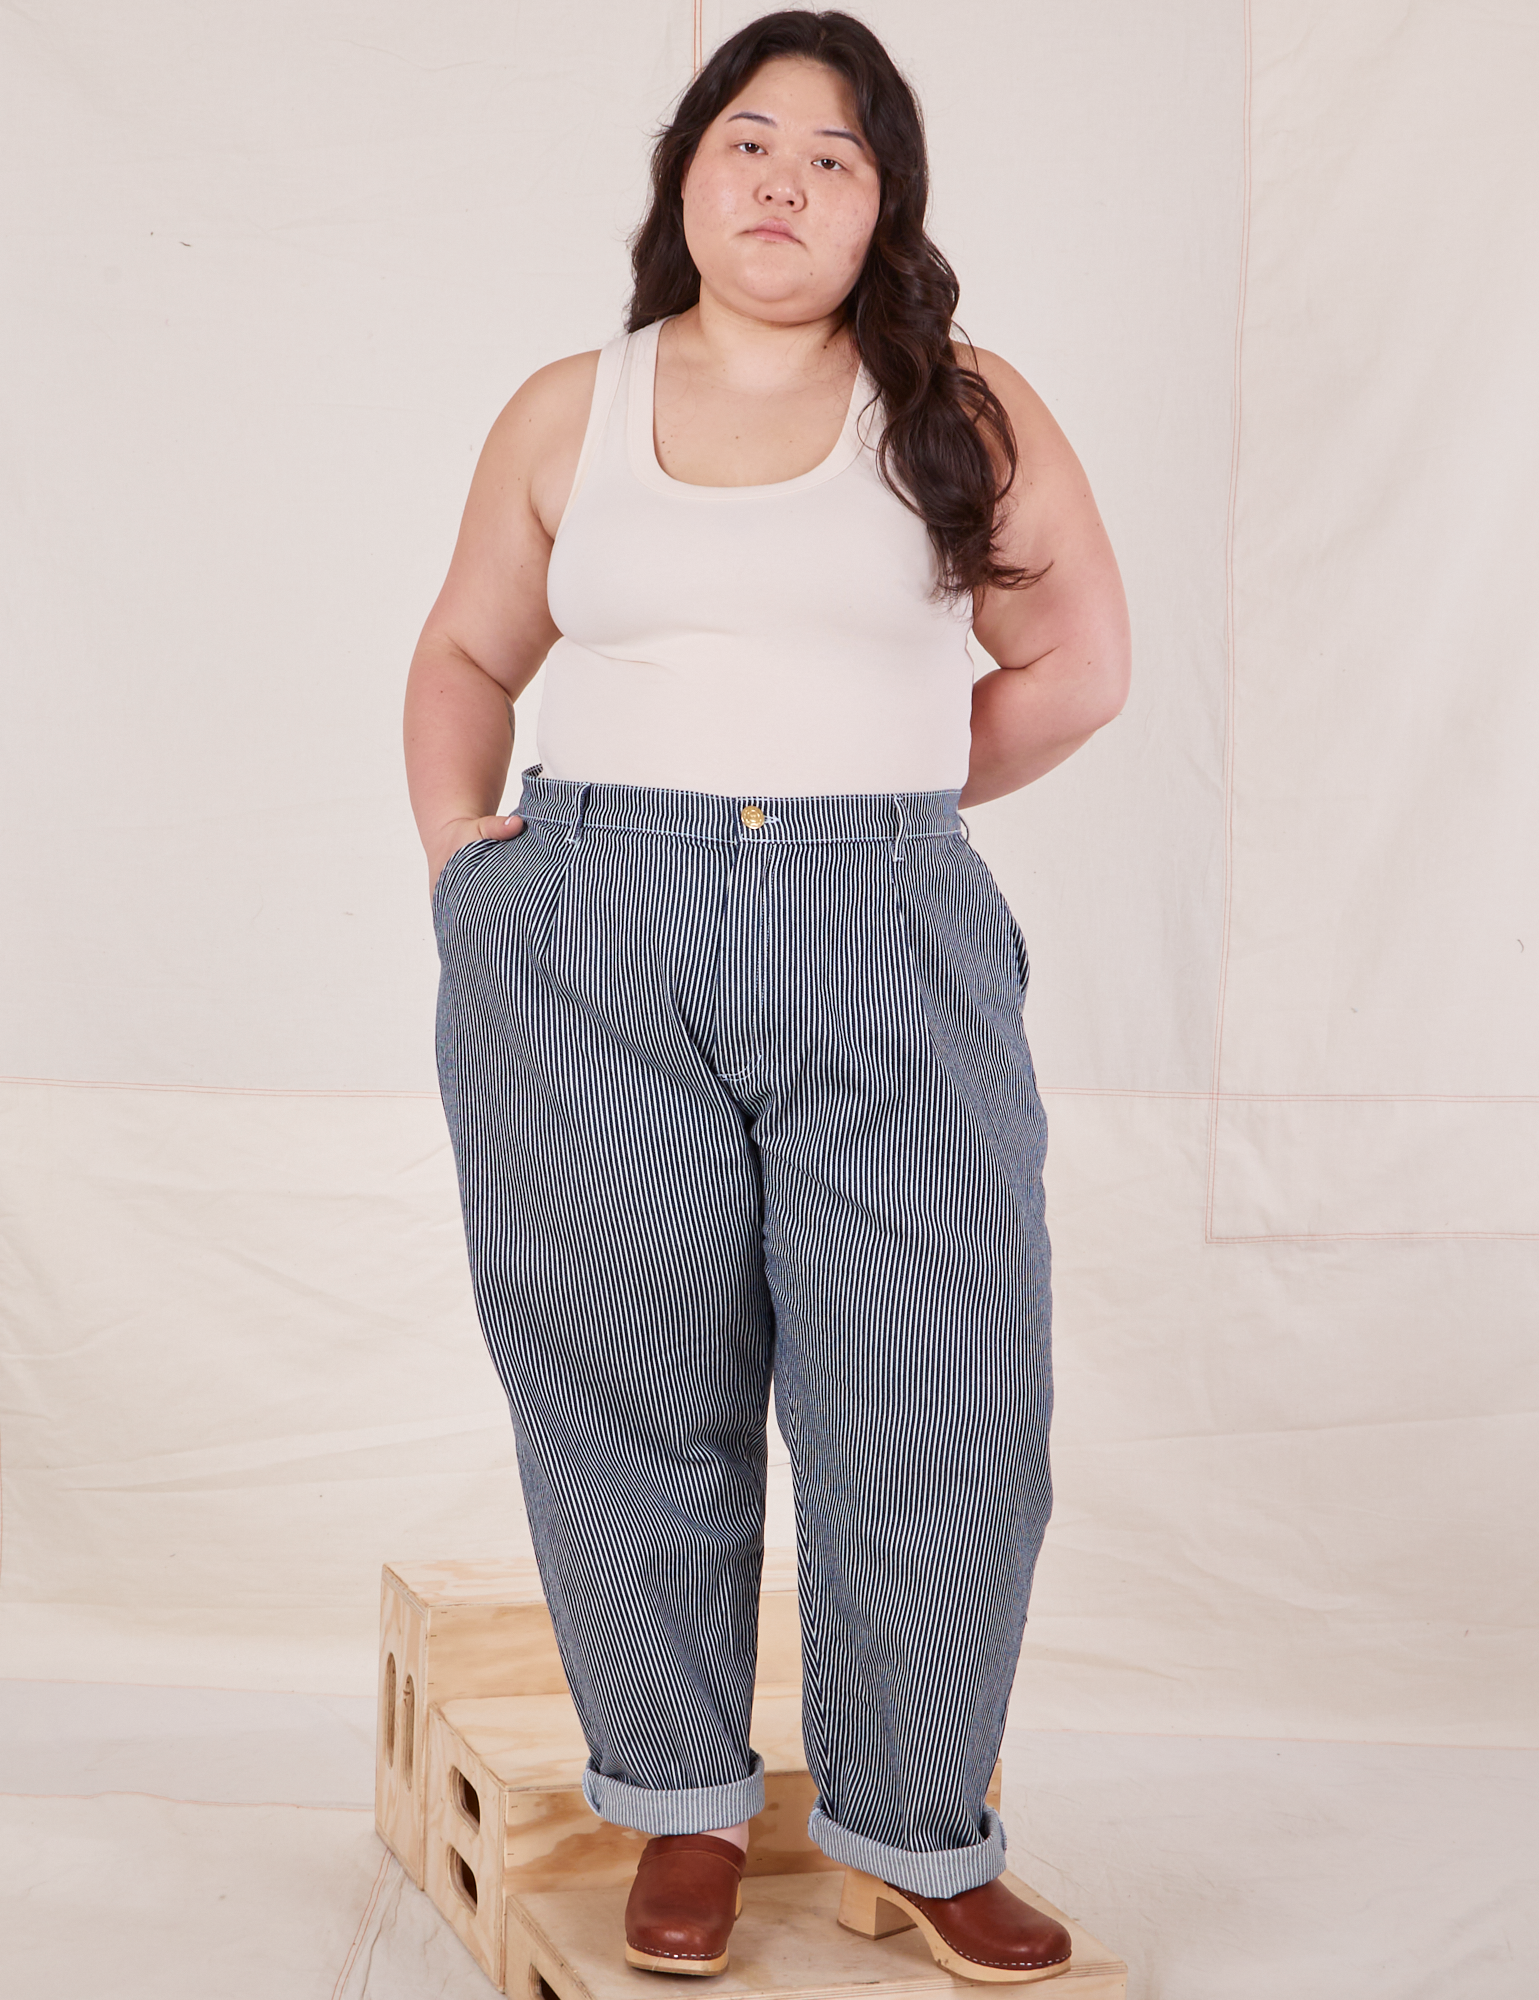 Ashley is 5&#39;7&quot; and wearing 1XL Denim Trouser Jeans in Railroad Stripe paired with Tank Top in  vintage tee off-white